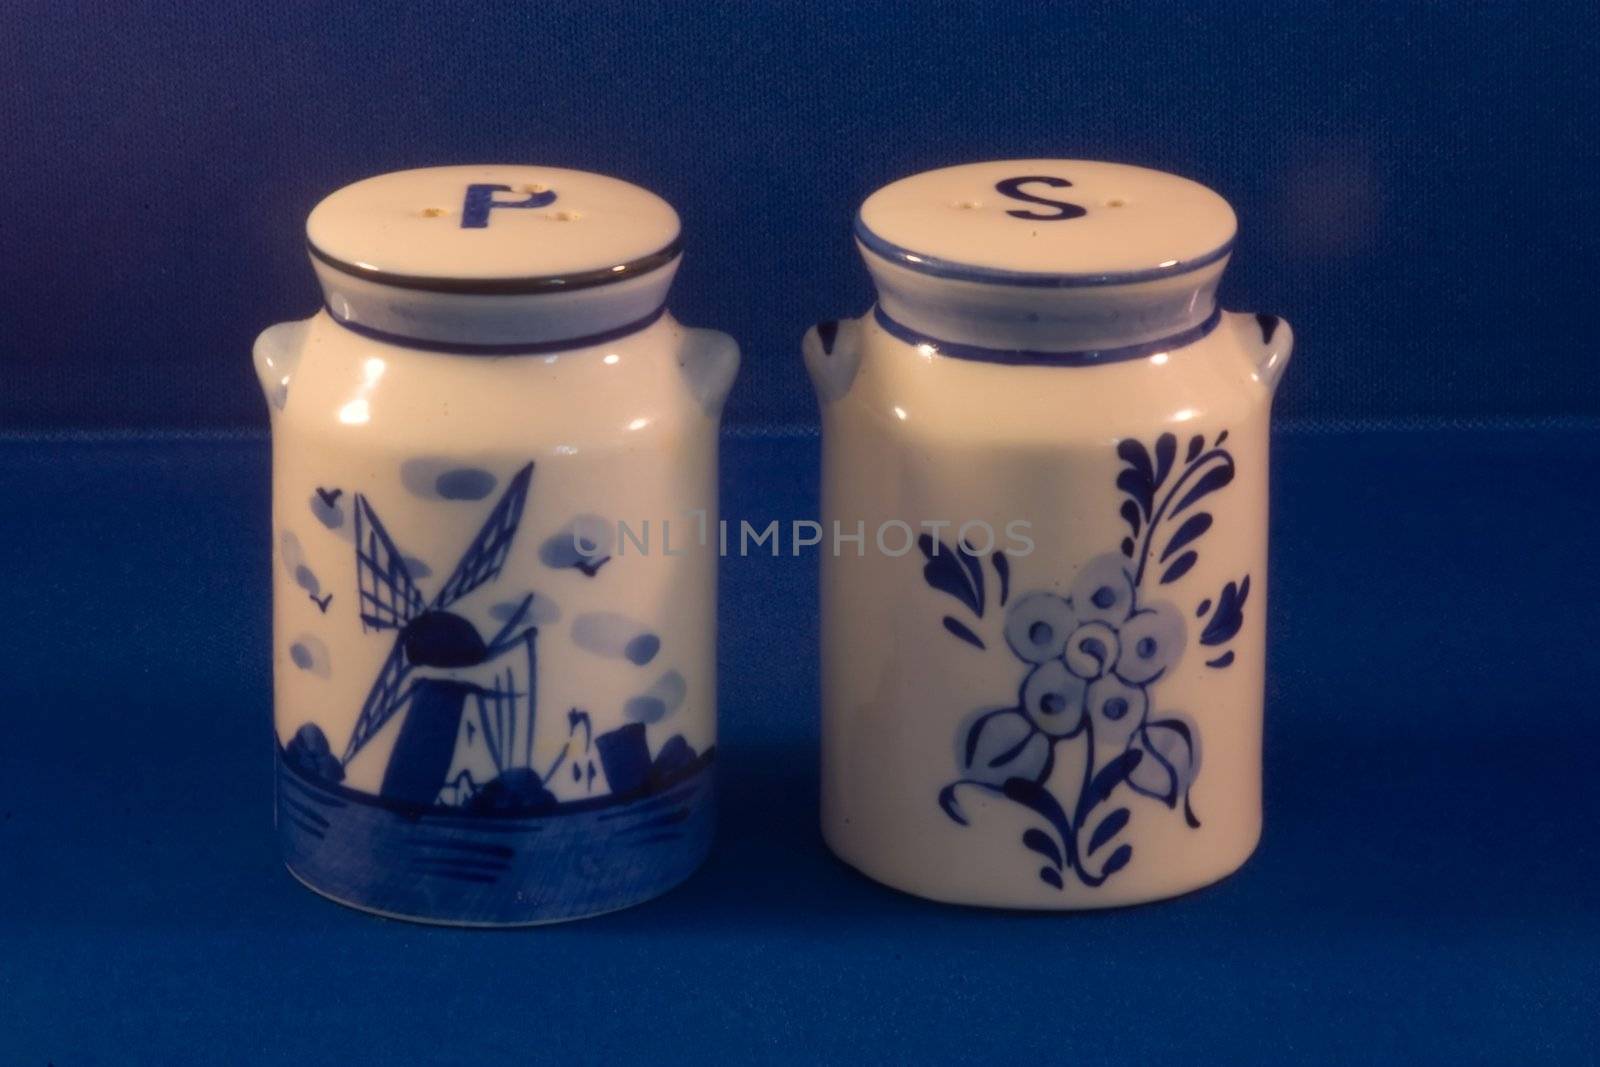 Salt and pepper shakers are condiment holders used in Western culture that are designed to allow food eaters to distribute edible salt and ground pepper.[1] This is a conjoined term for salt shaker and pepper shaker.